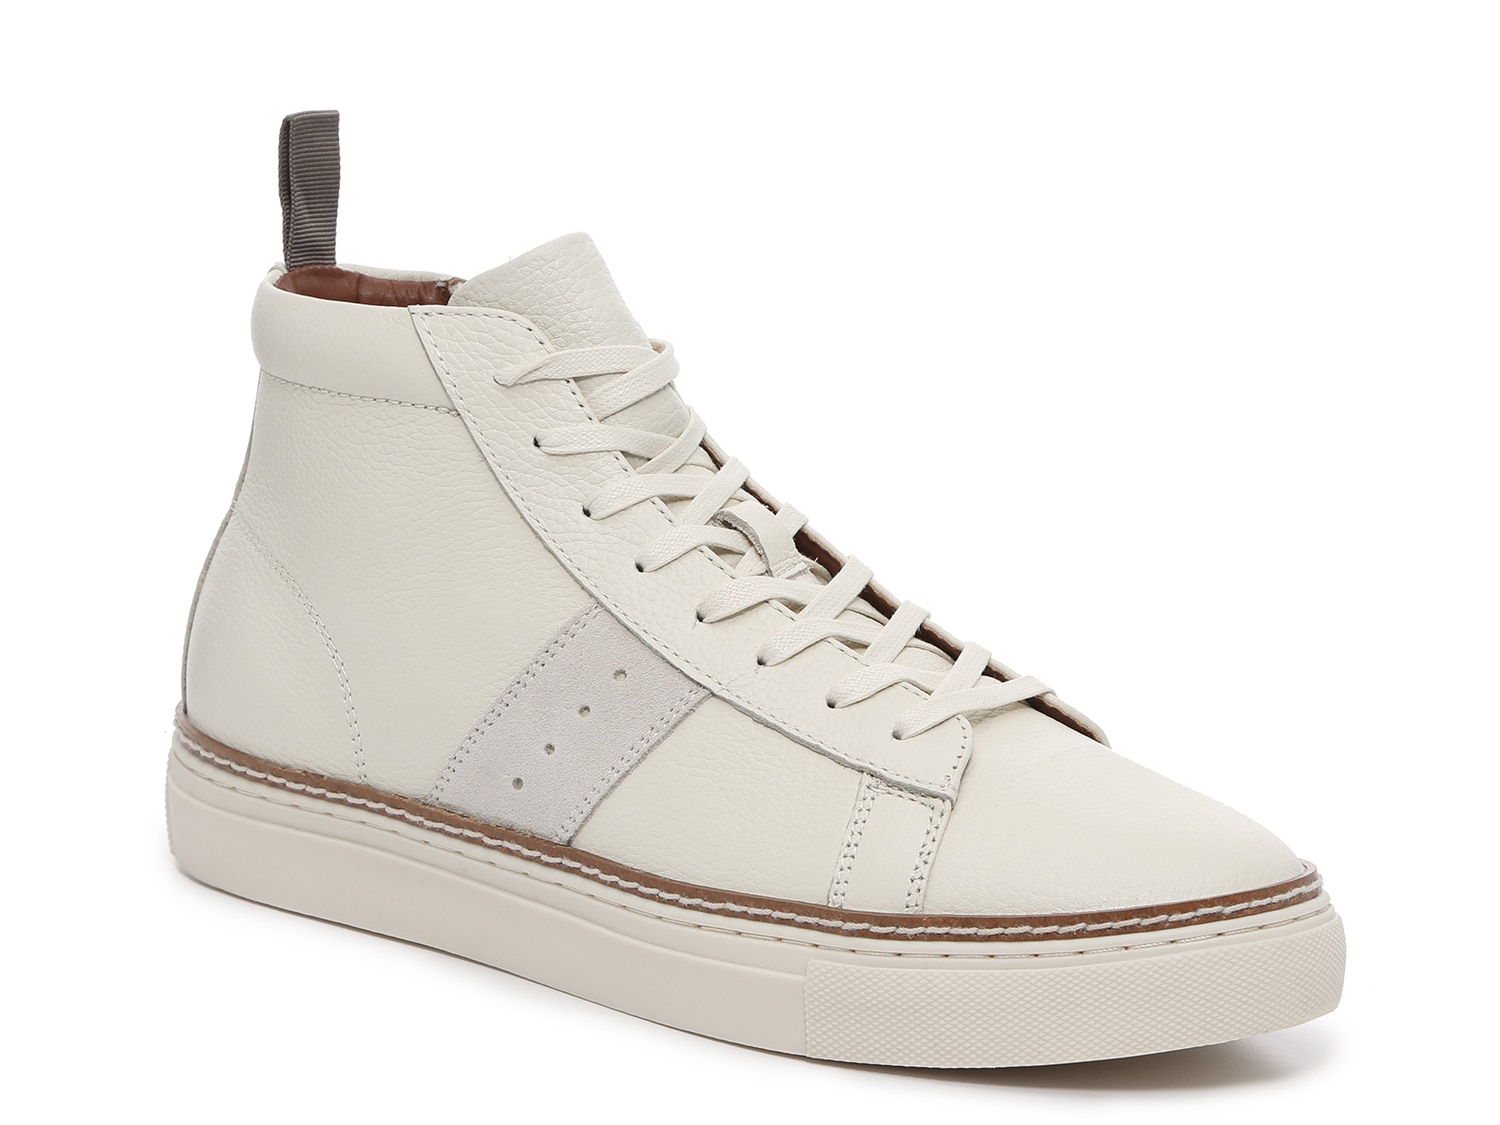 Crown Vintage Bromley High-Top Sneaker - Men's - Free Shipping | DSW